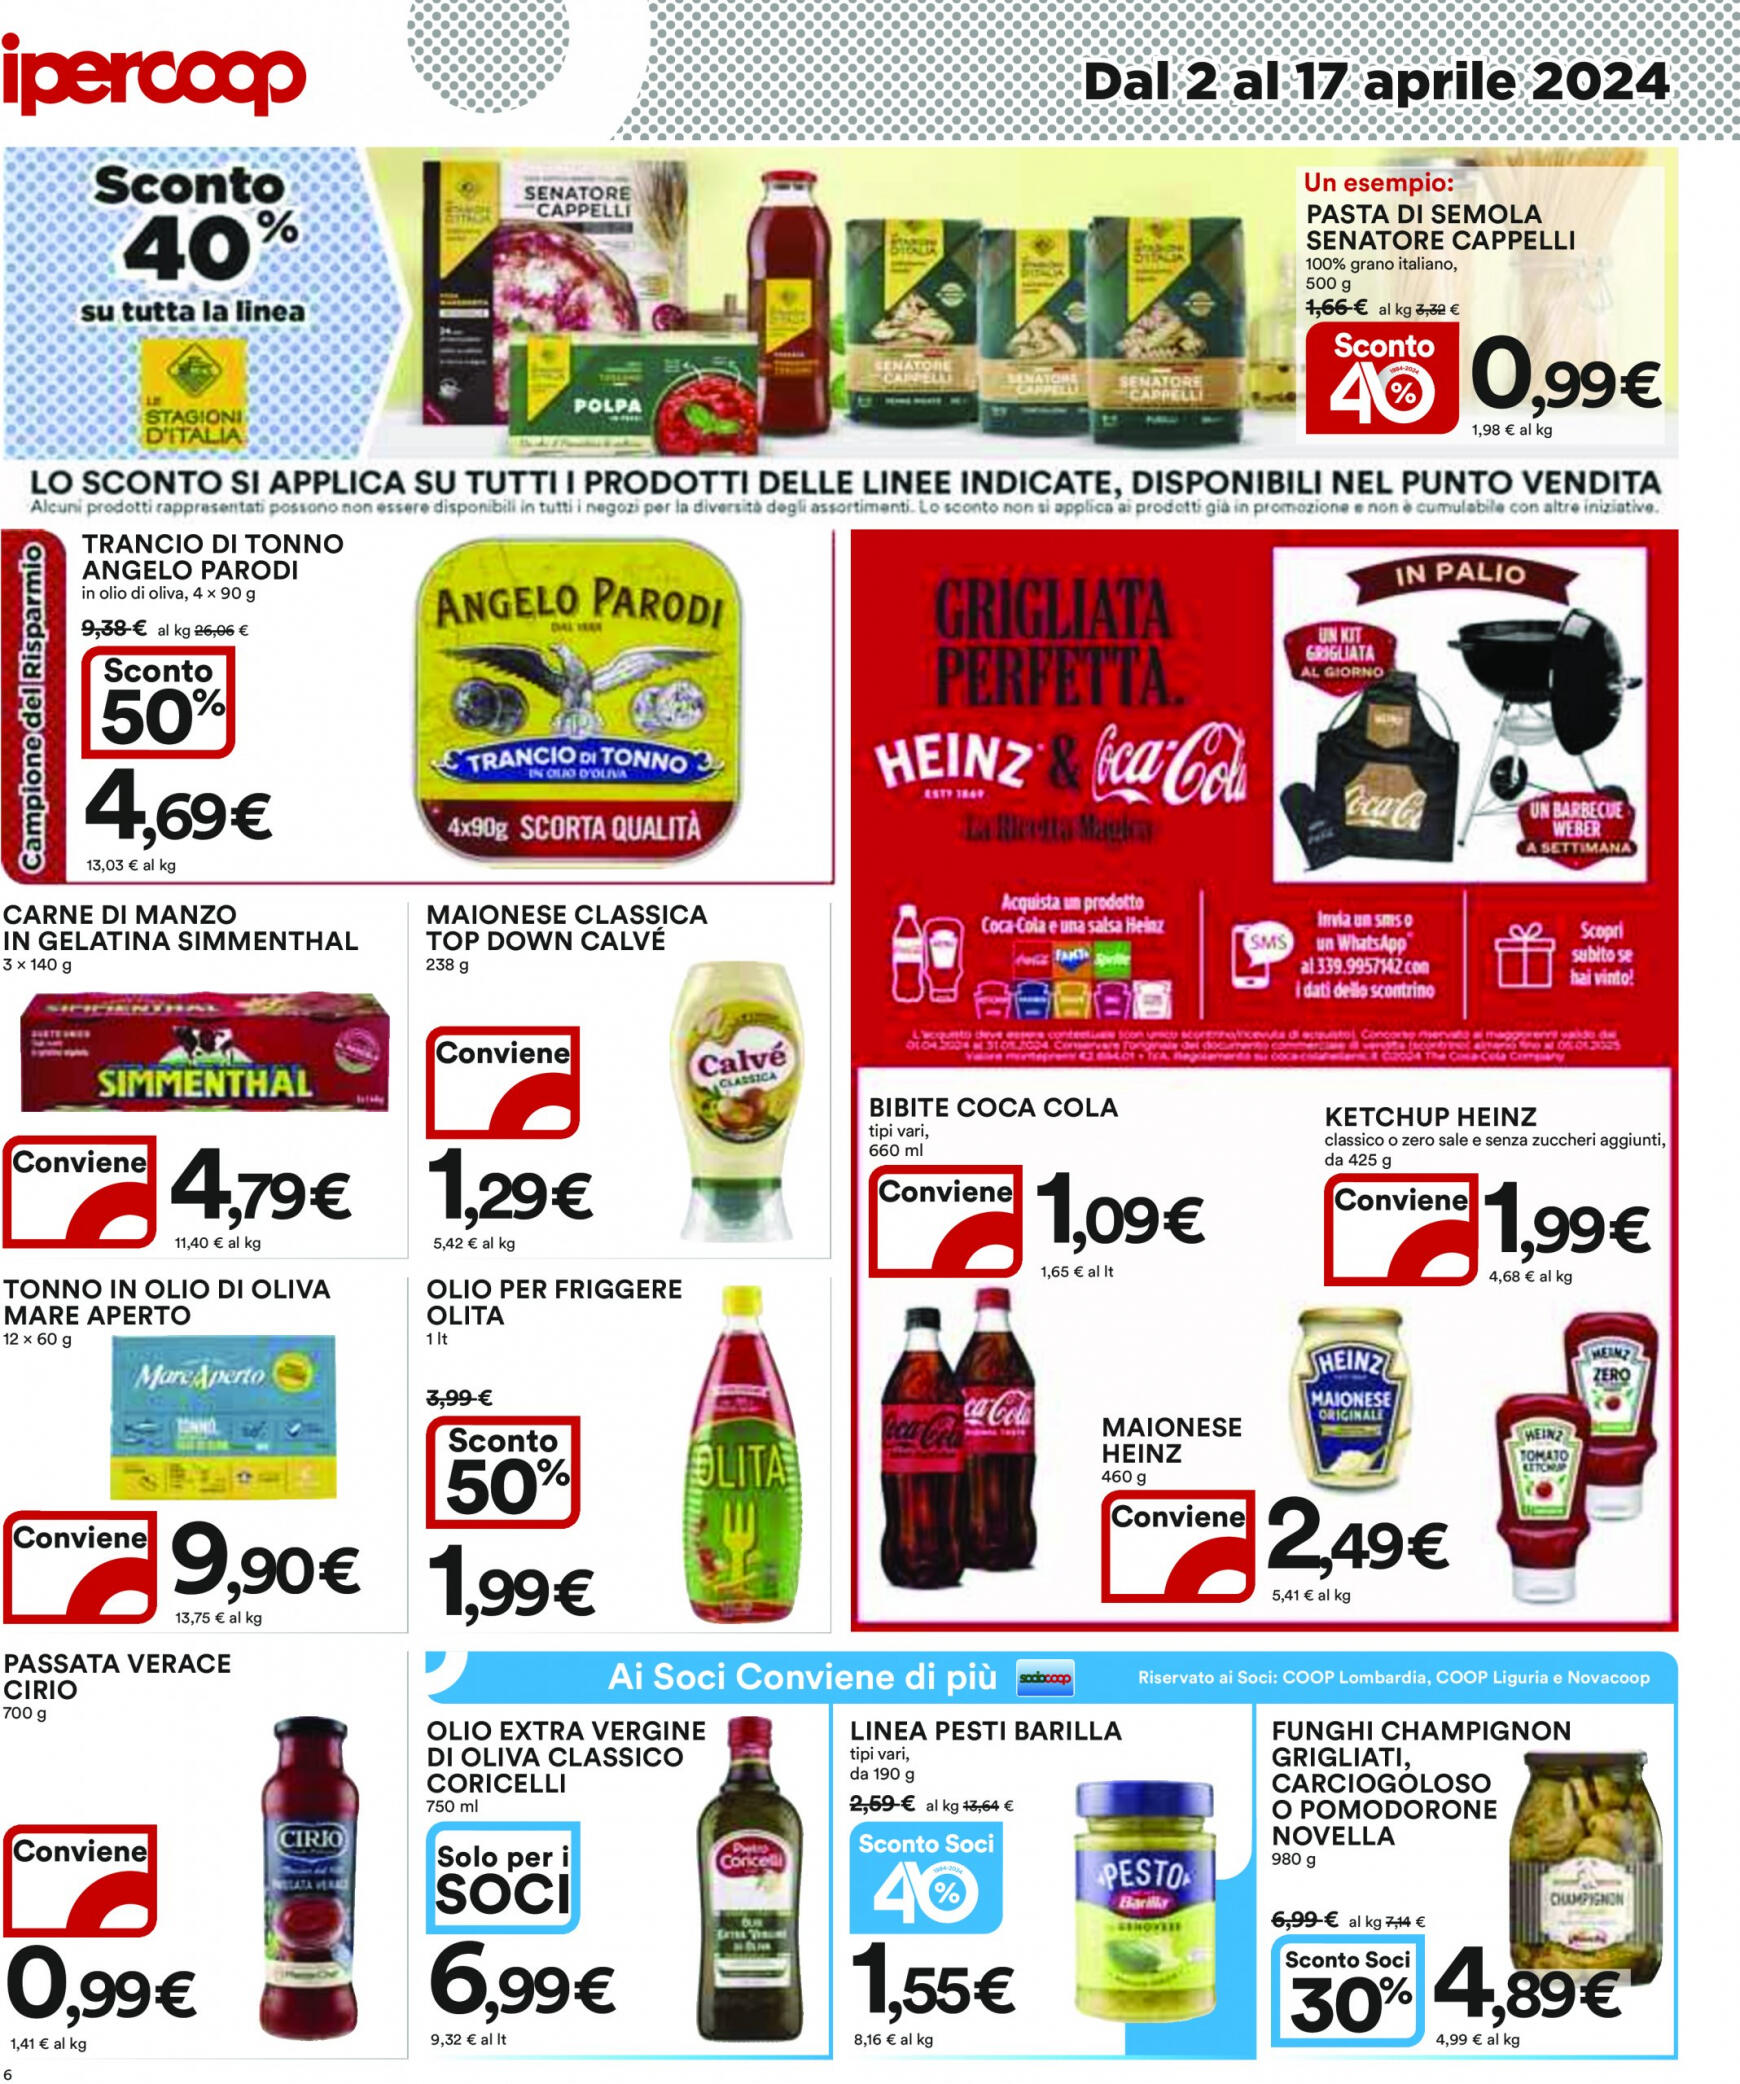 coop - Nuovo volantino Coop 02.04. - 17.04. - page: 6